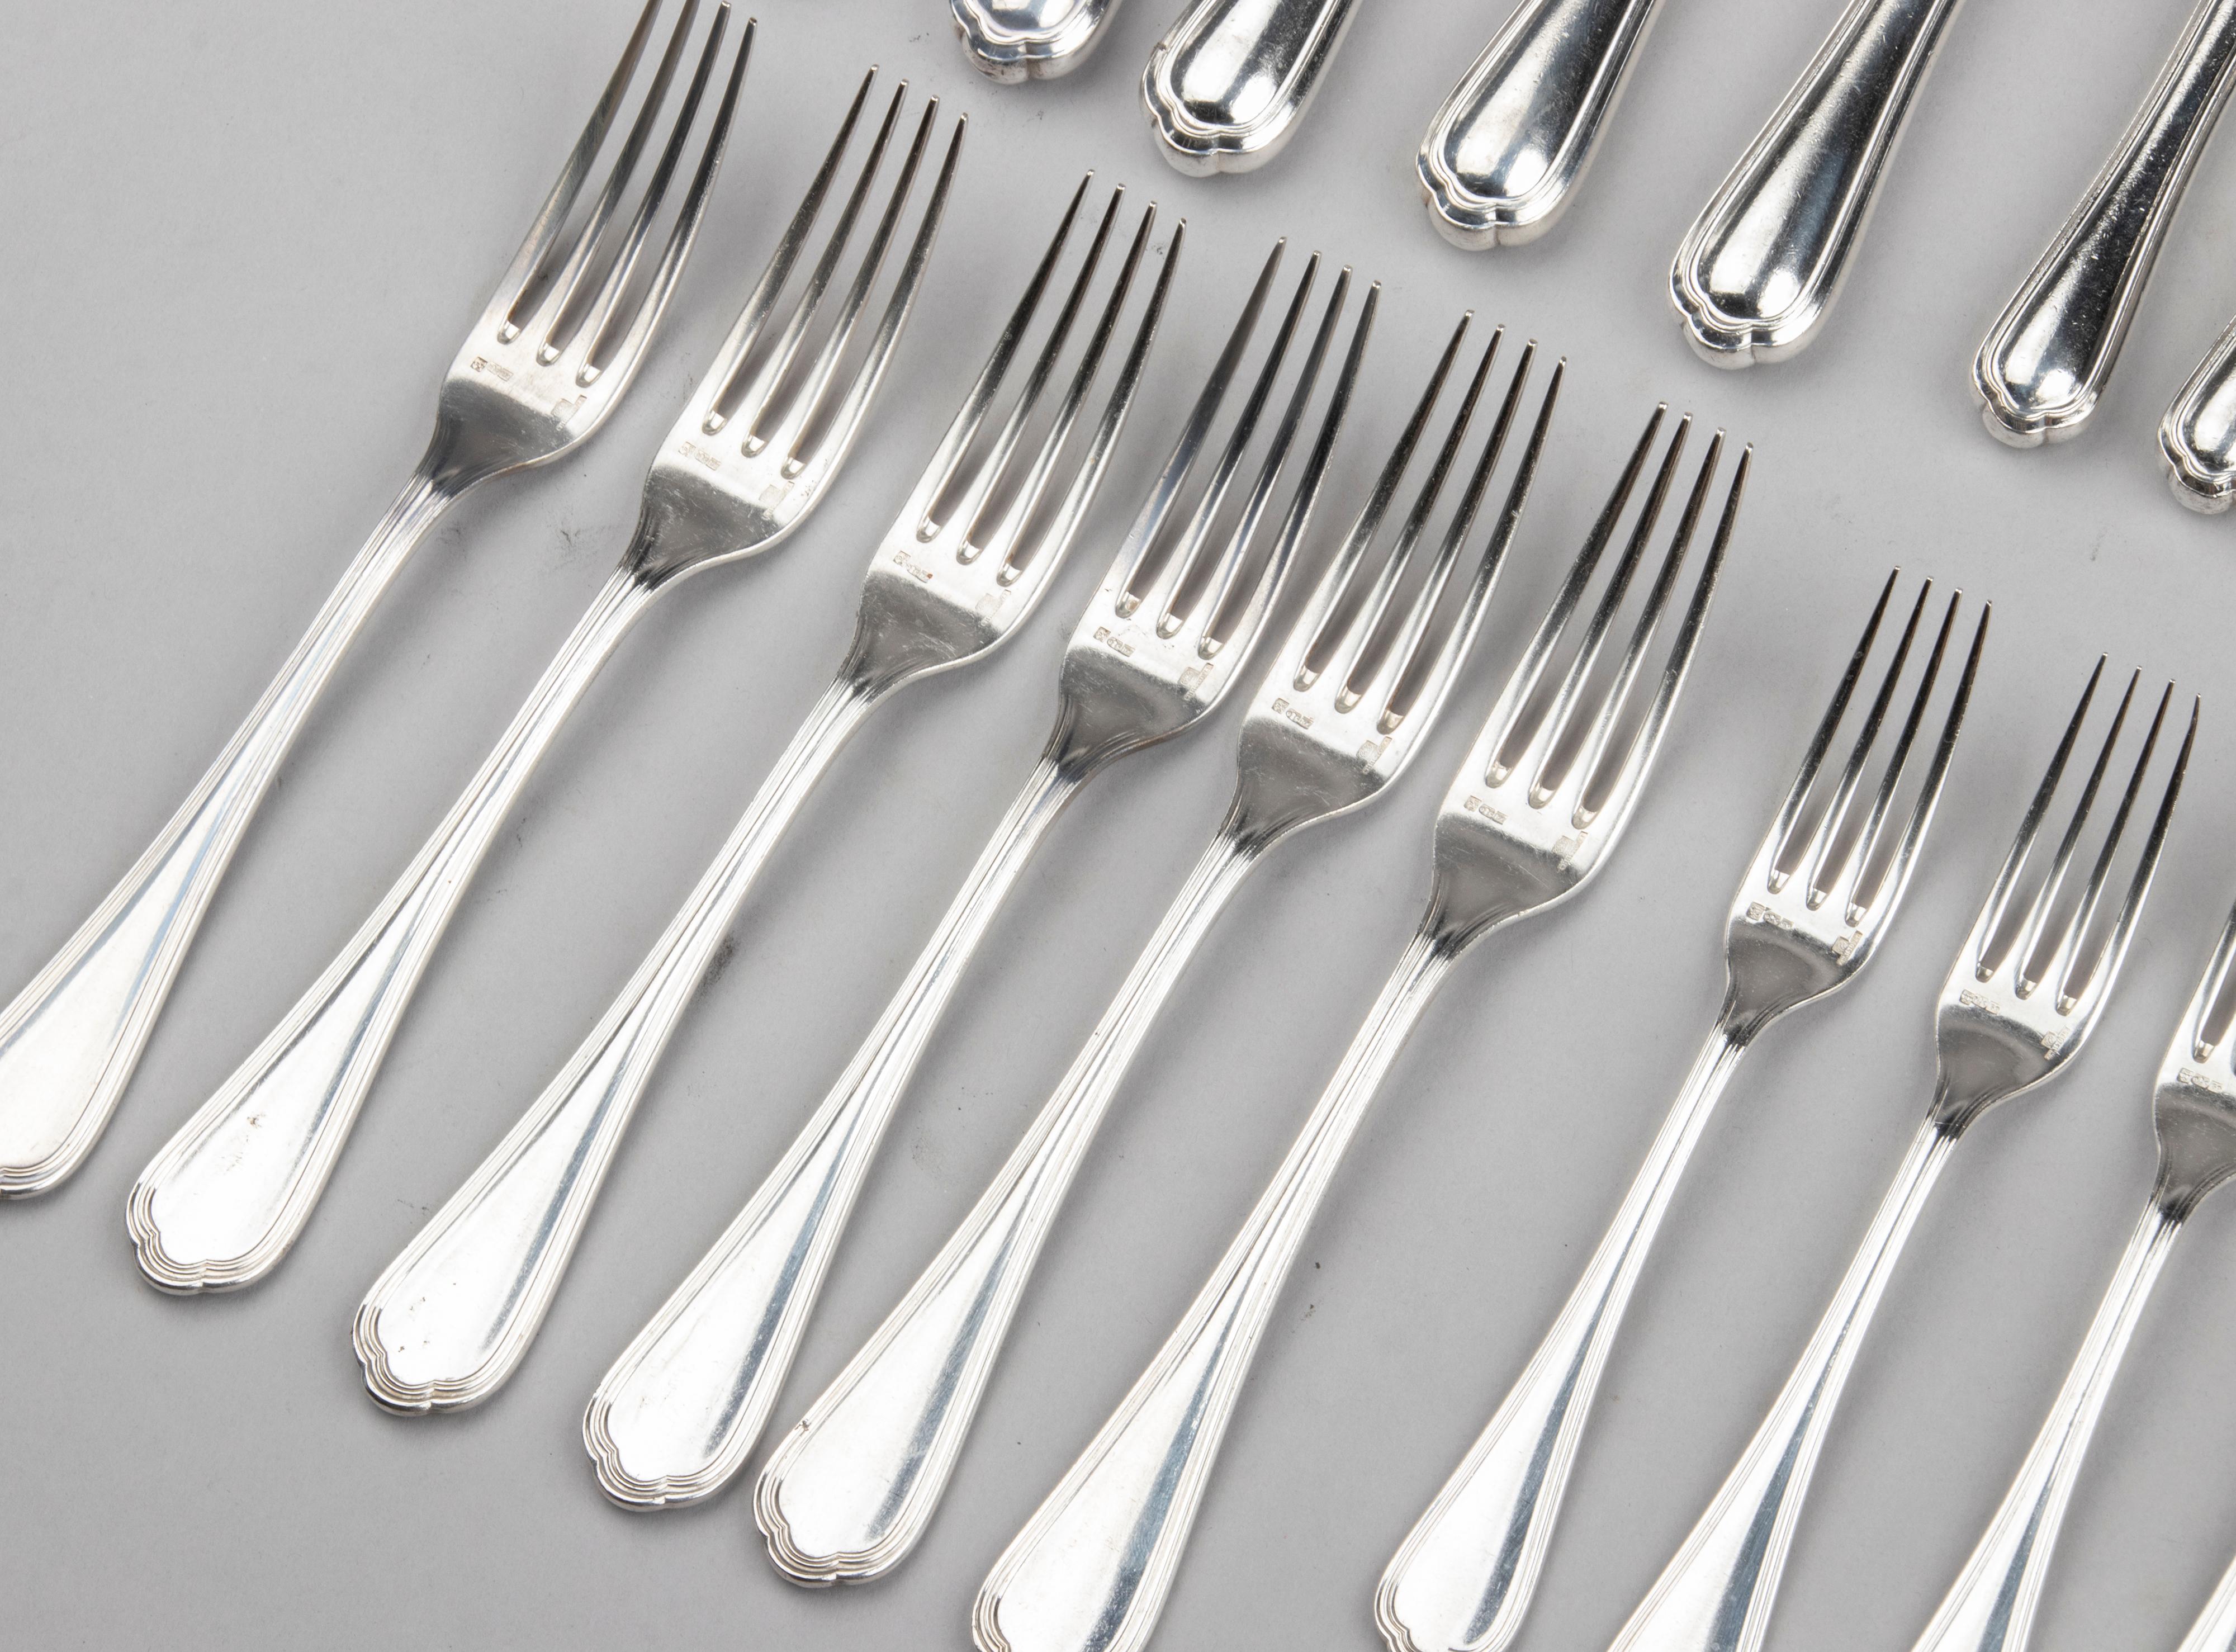 30-Piece Set of Silver Plated Flatware Made by Christofle Model Spatours 7